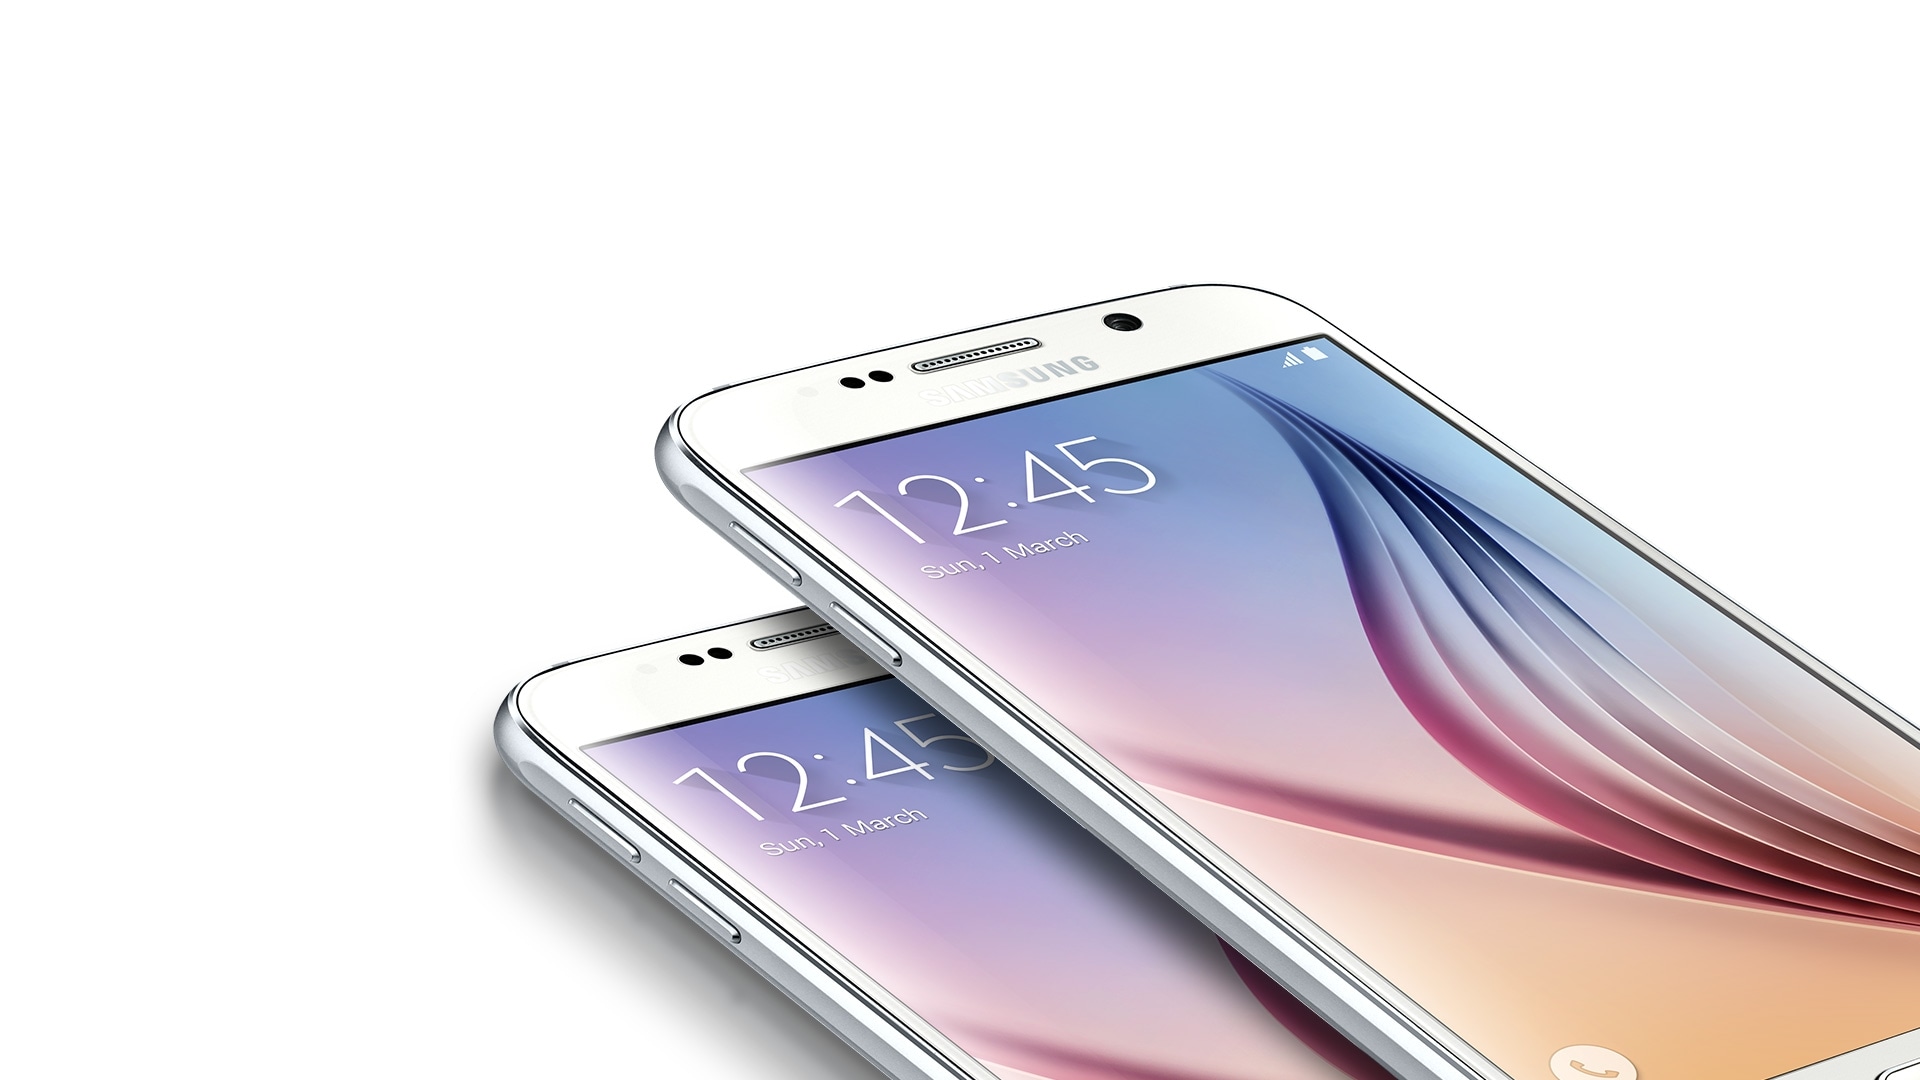 Galaxy S6 edge product images